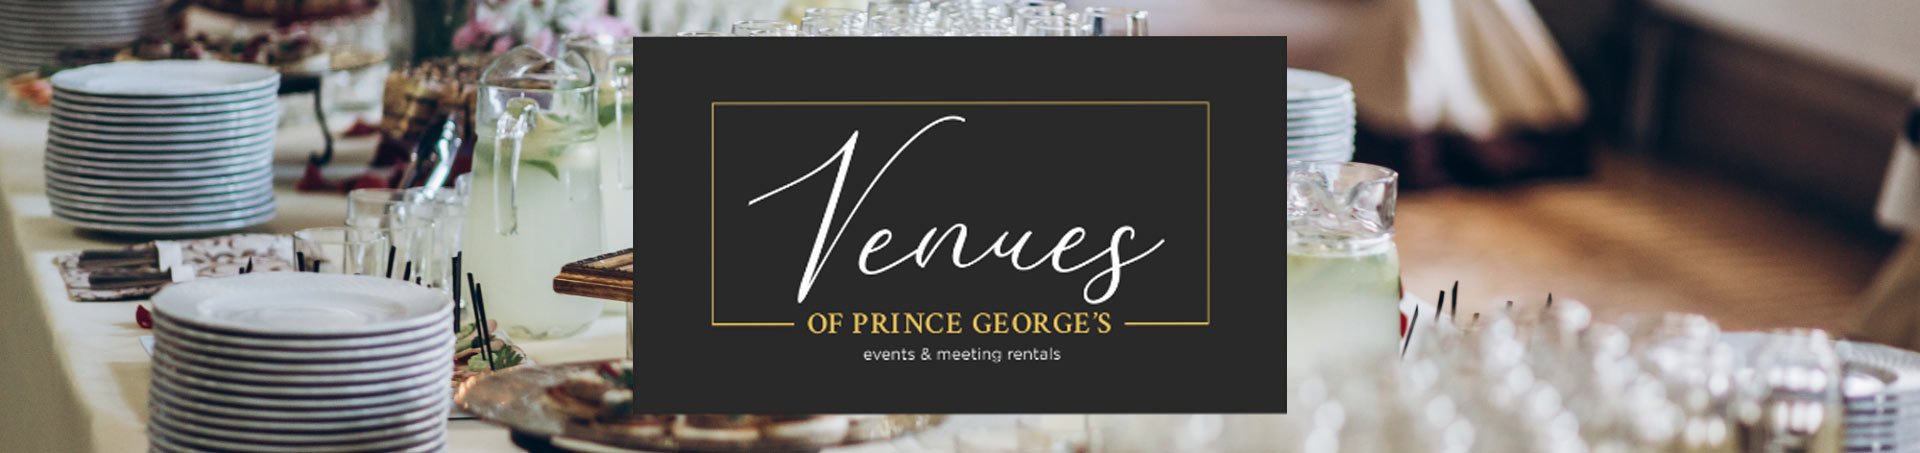 Venues Home Page Image